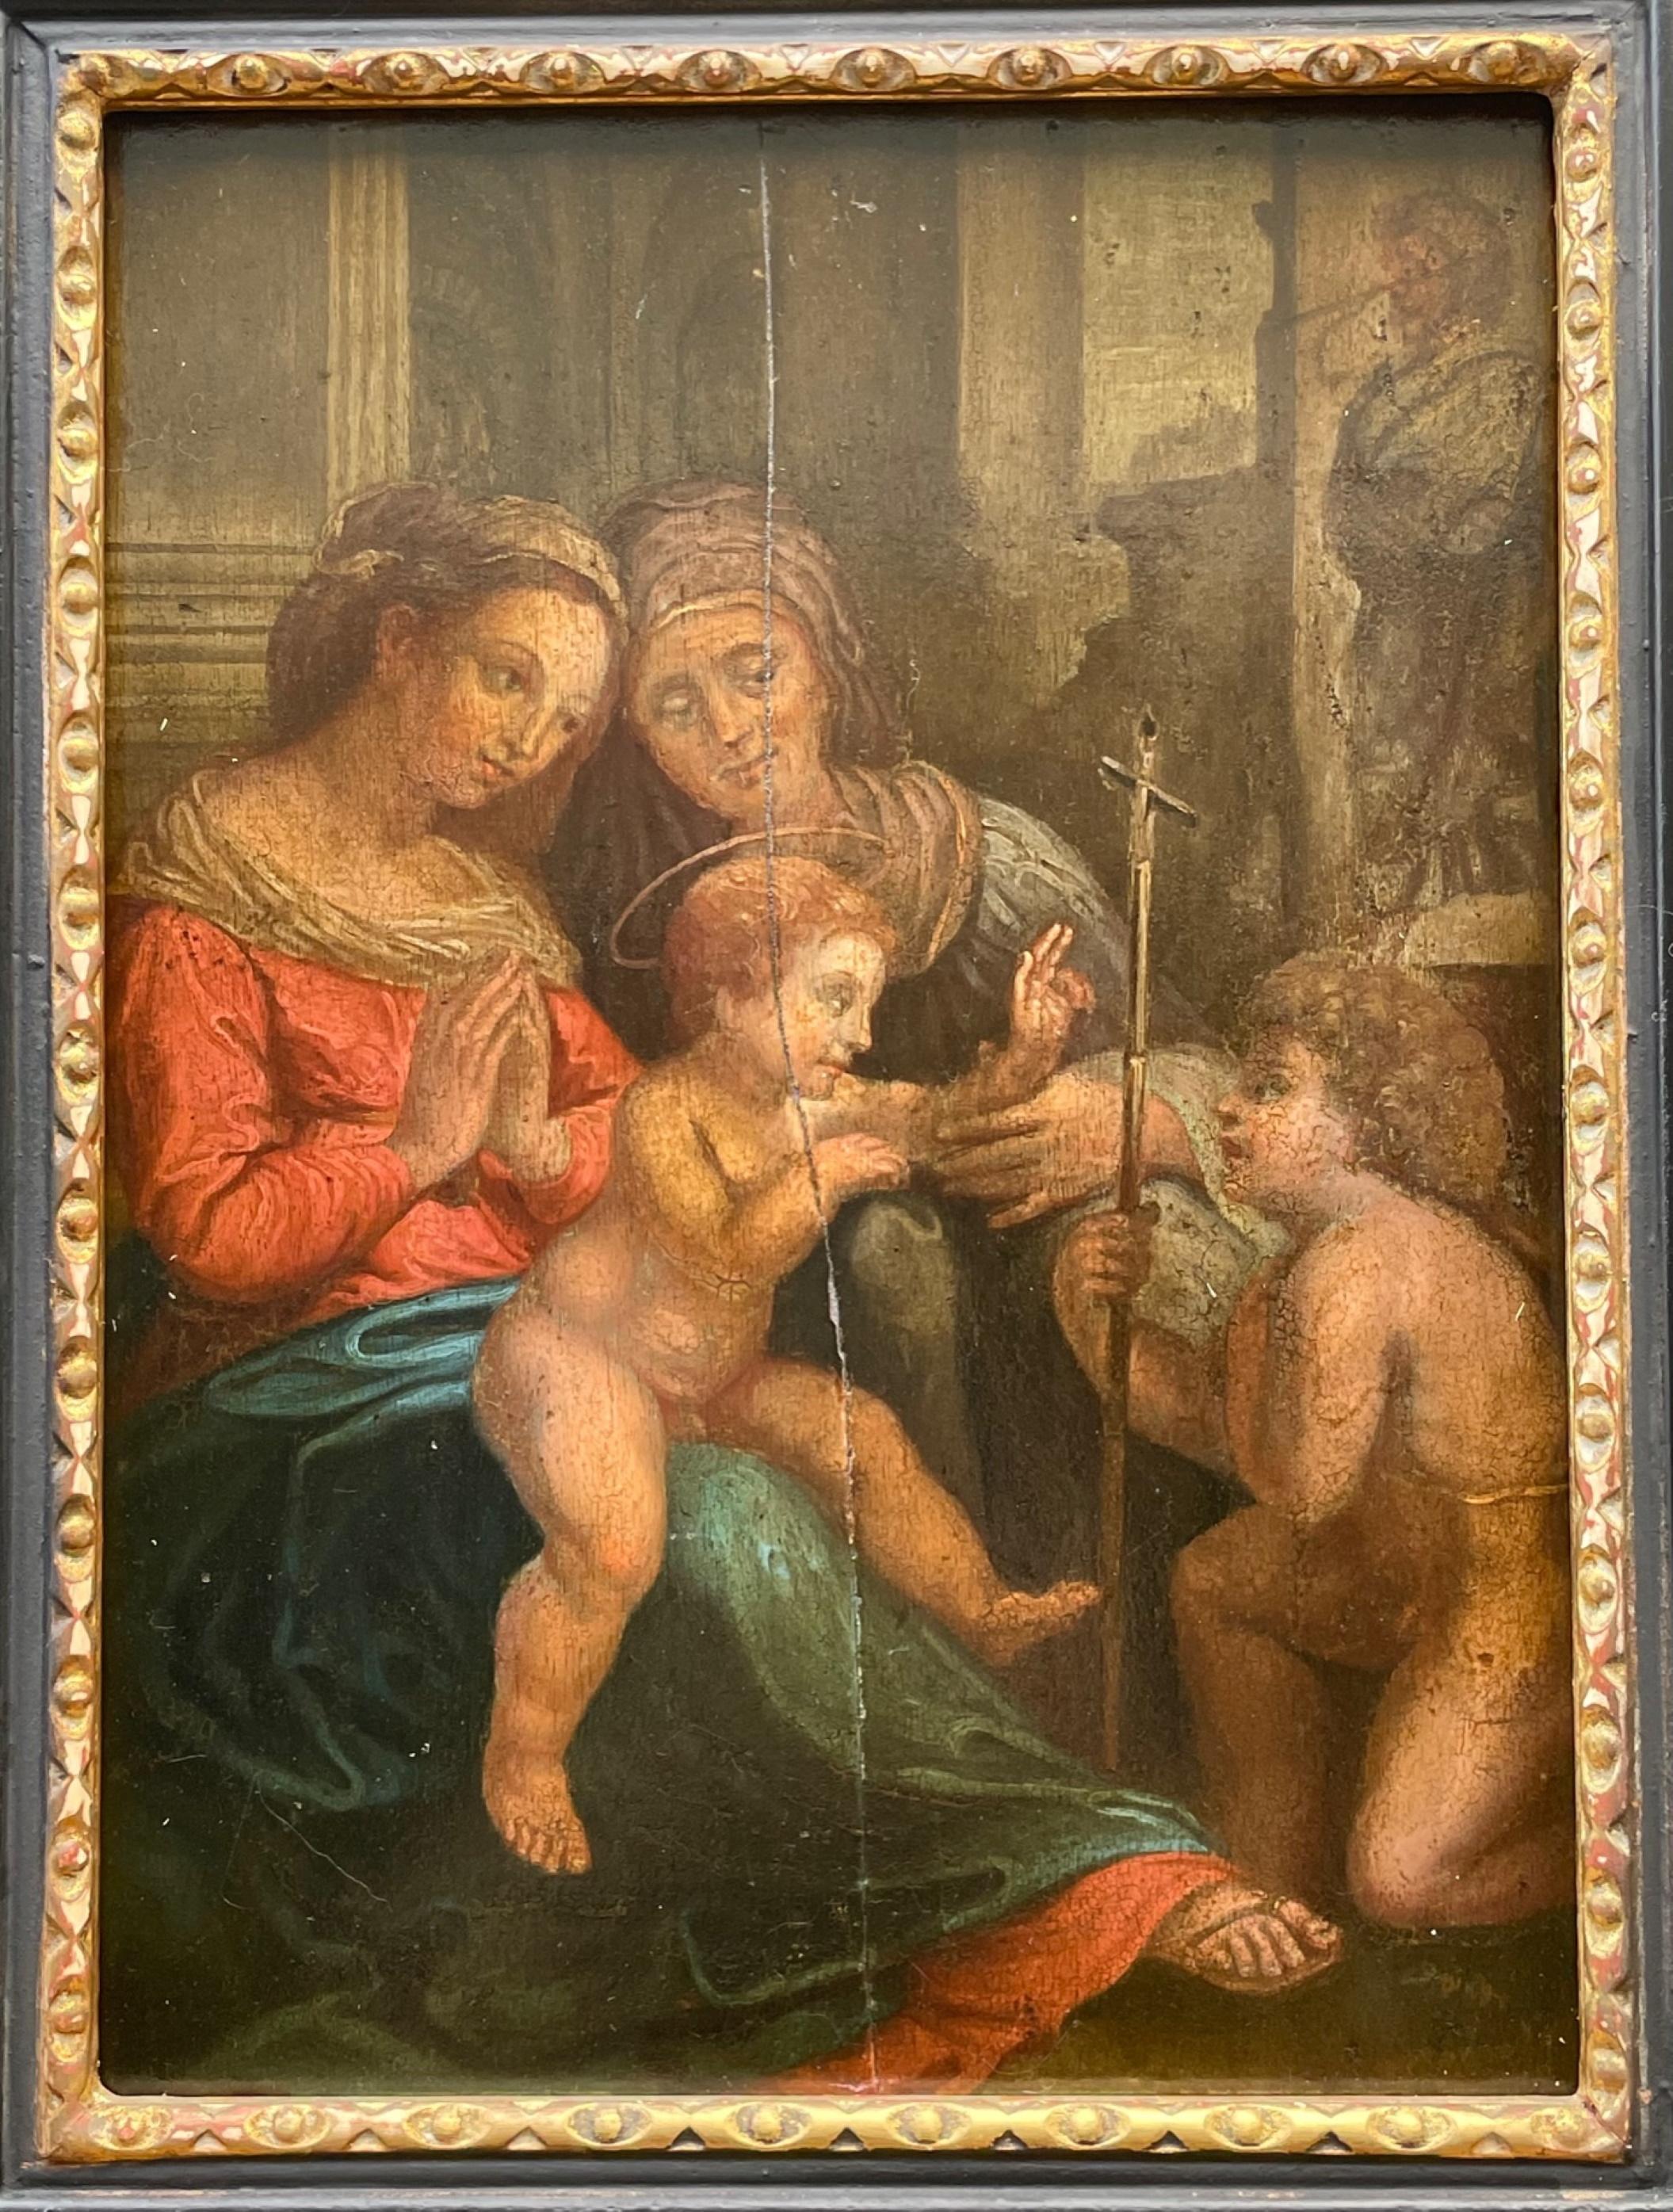 17th century Italian old master painting Madonna and Child with St. Anne and St. John the Baptist.

Important Tuscan School Old Master painting in oil on a hand shaved wood panel. It represents the iconic theme of the Virgin and St. Anne with